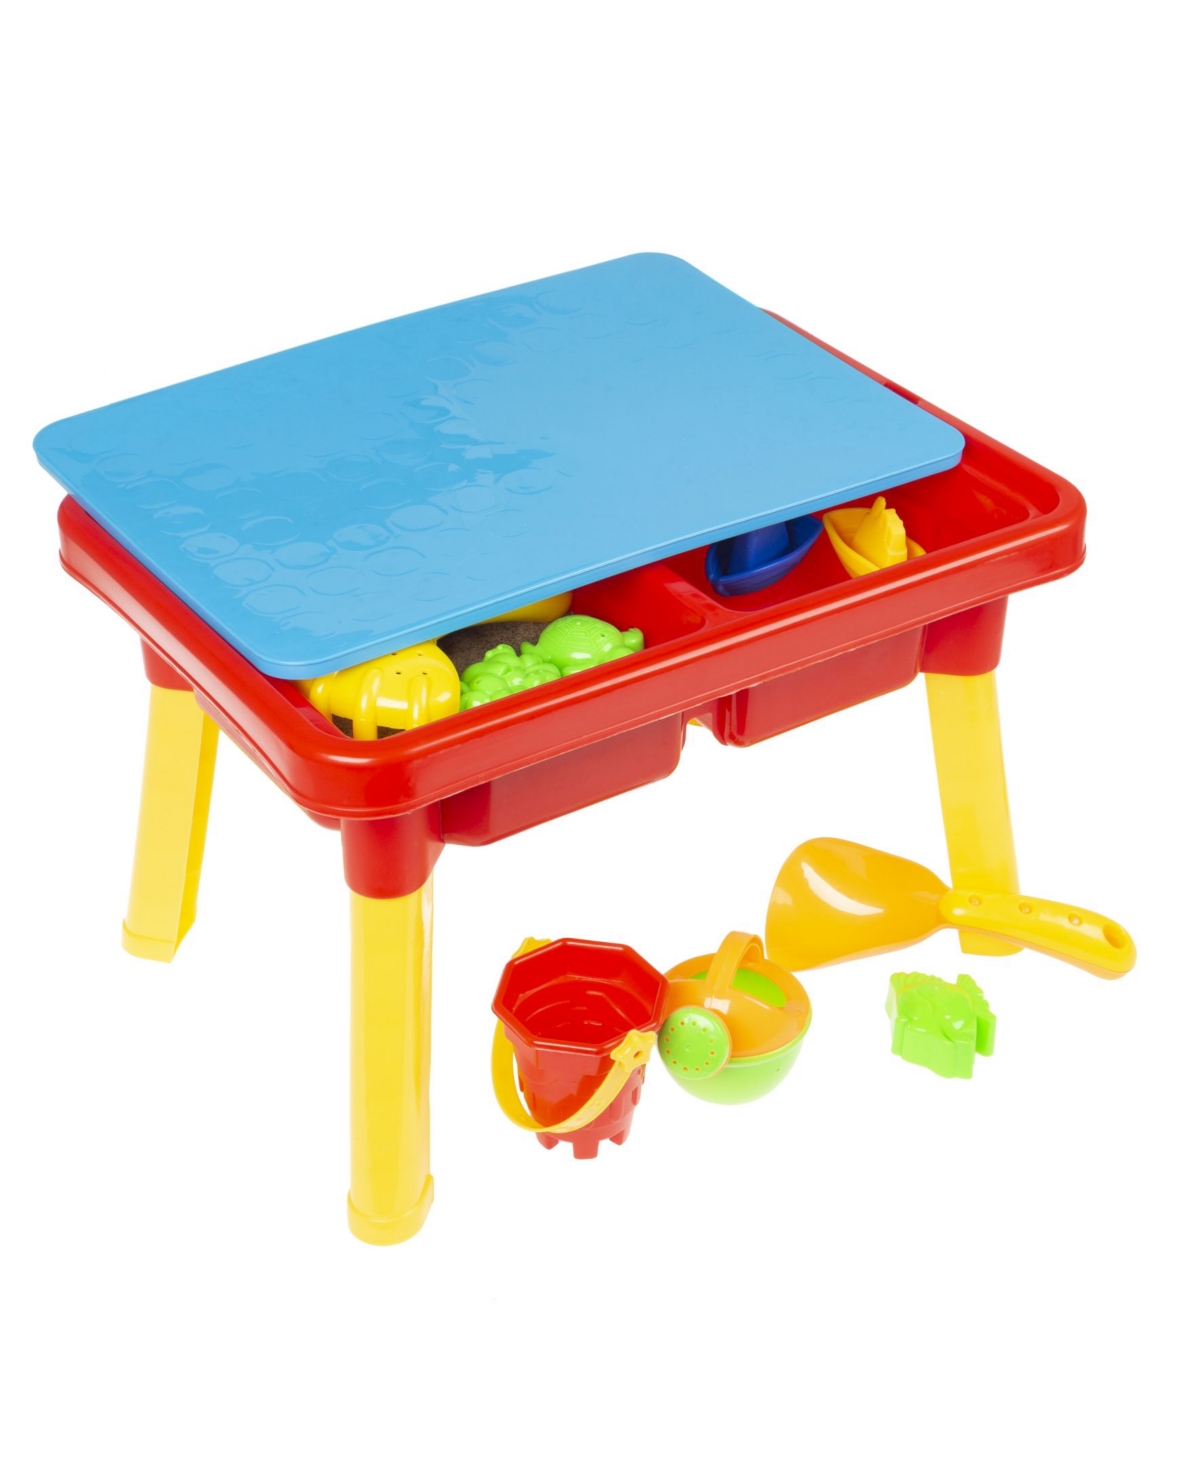 Shop Trademark Global Hey Play Water Or Sand Sensory Table With Lid And Toys In Multi